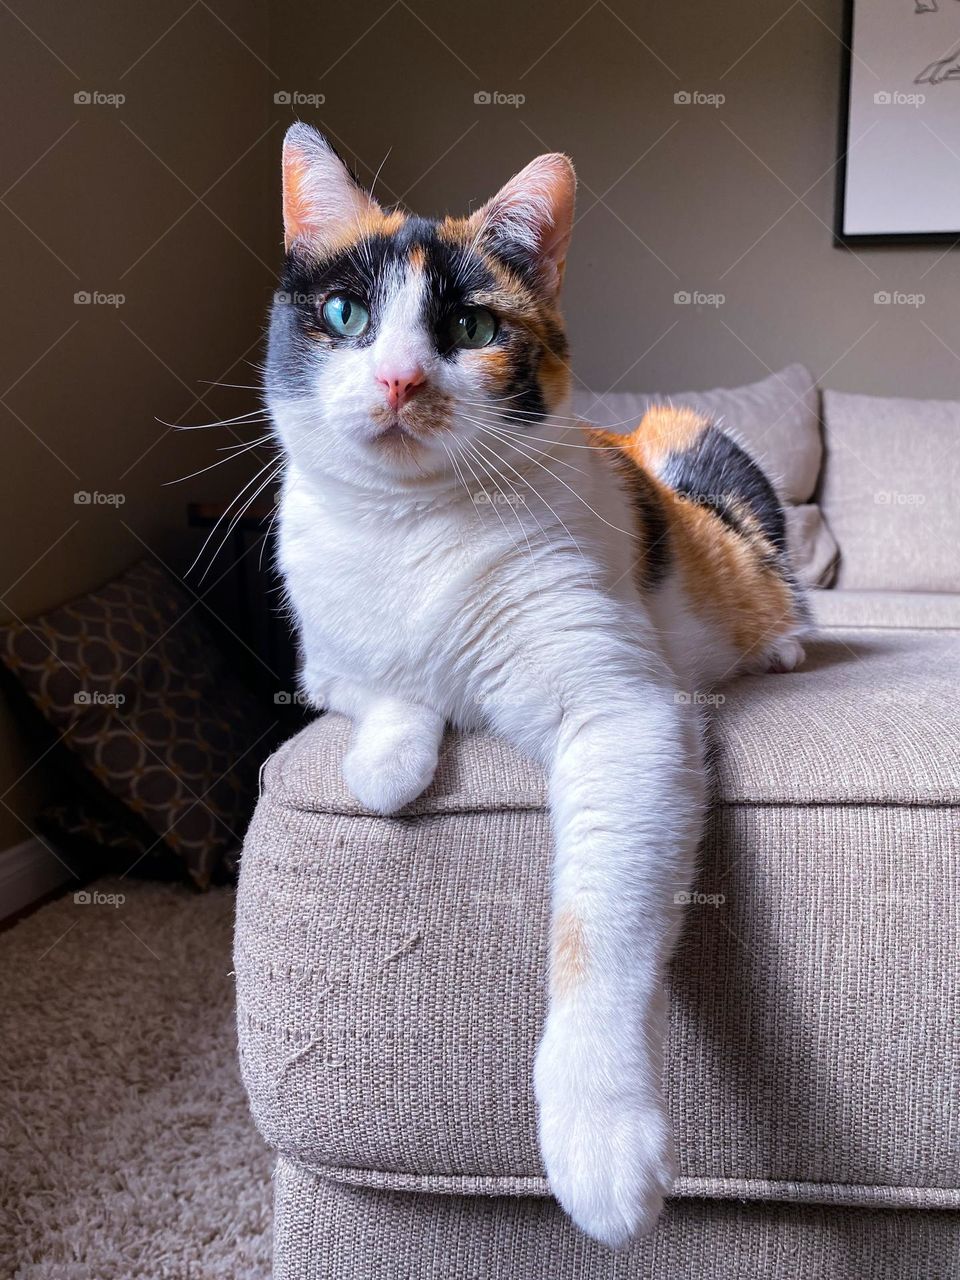 Low angle view of a calico cat lying on a couch 